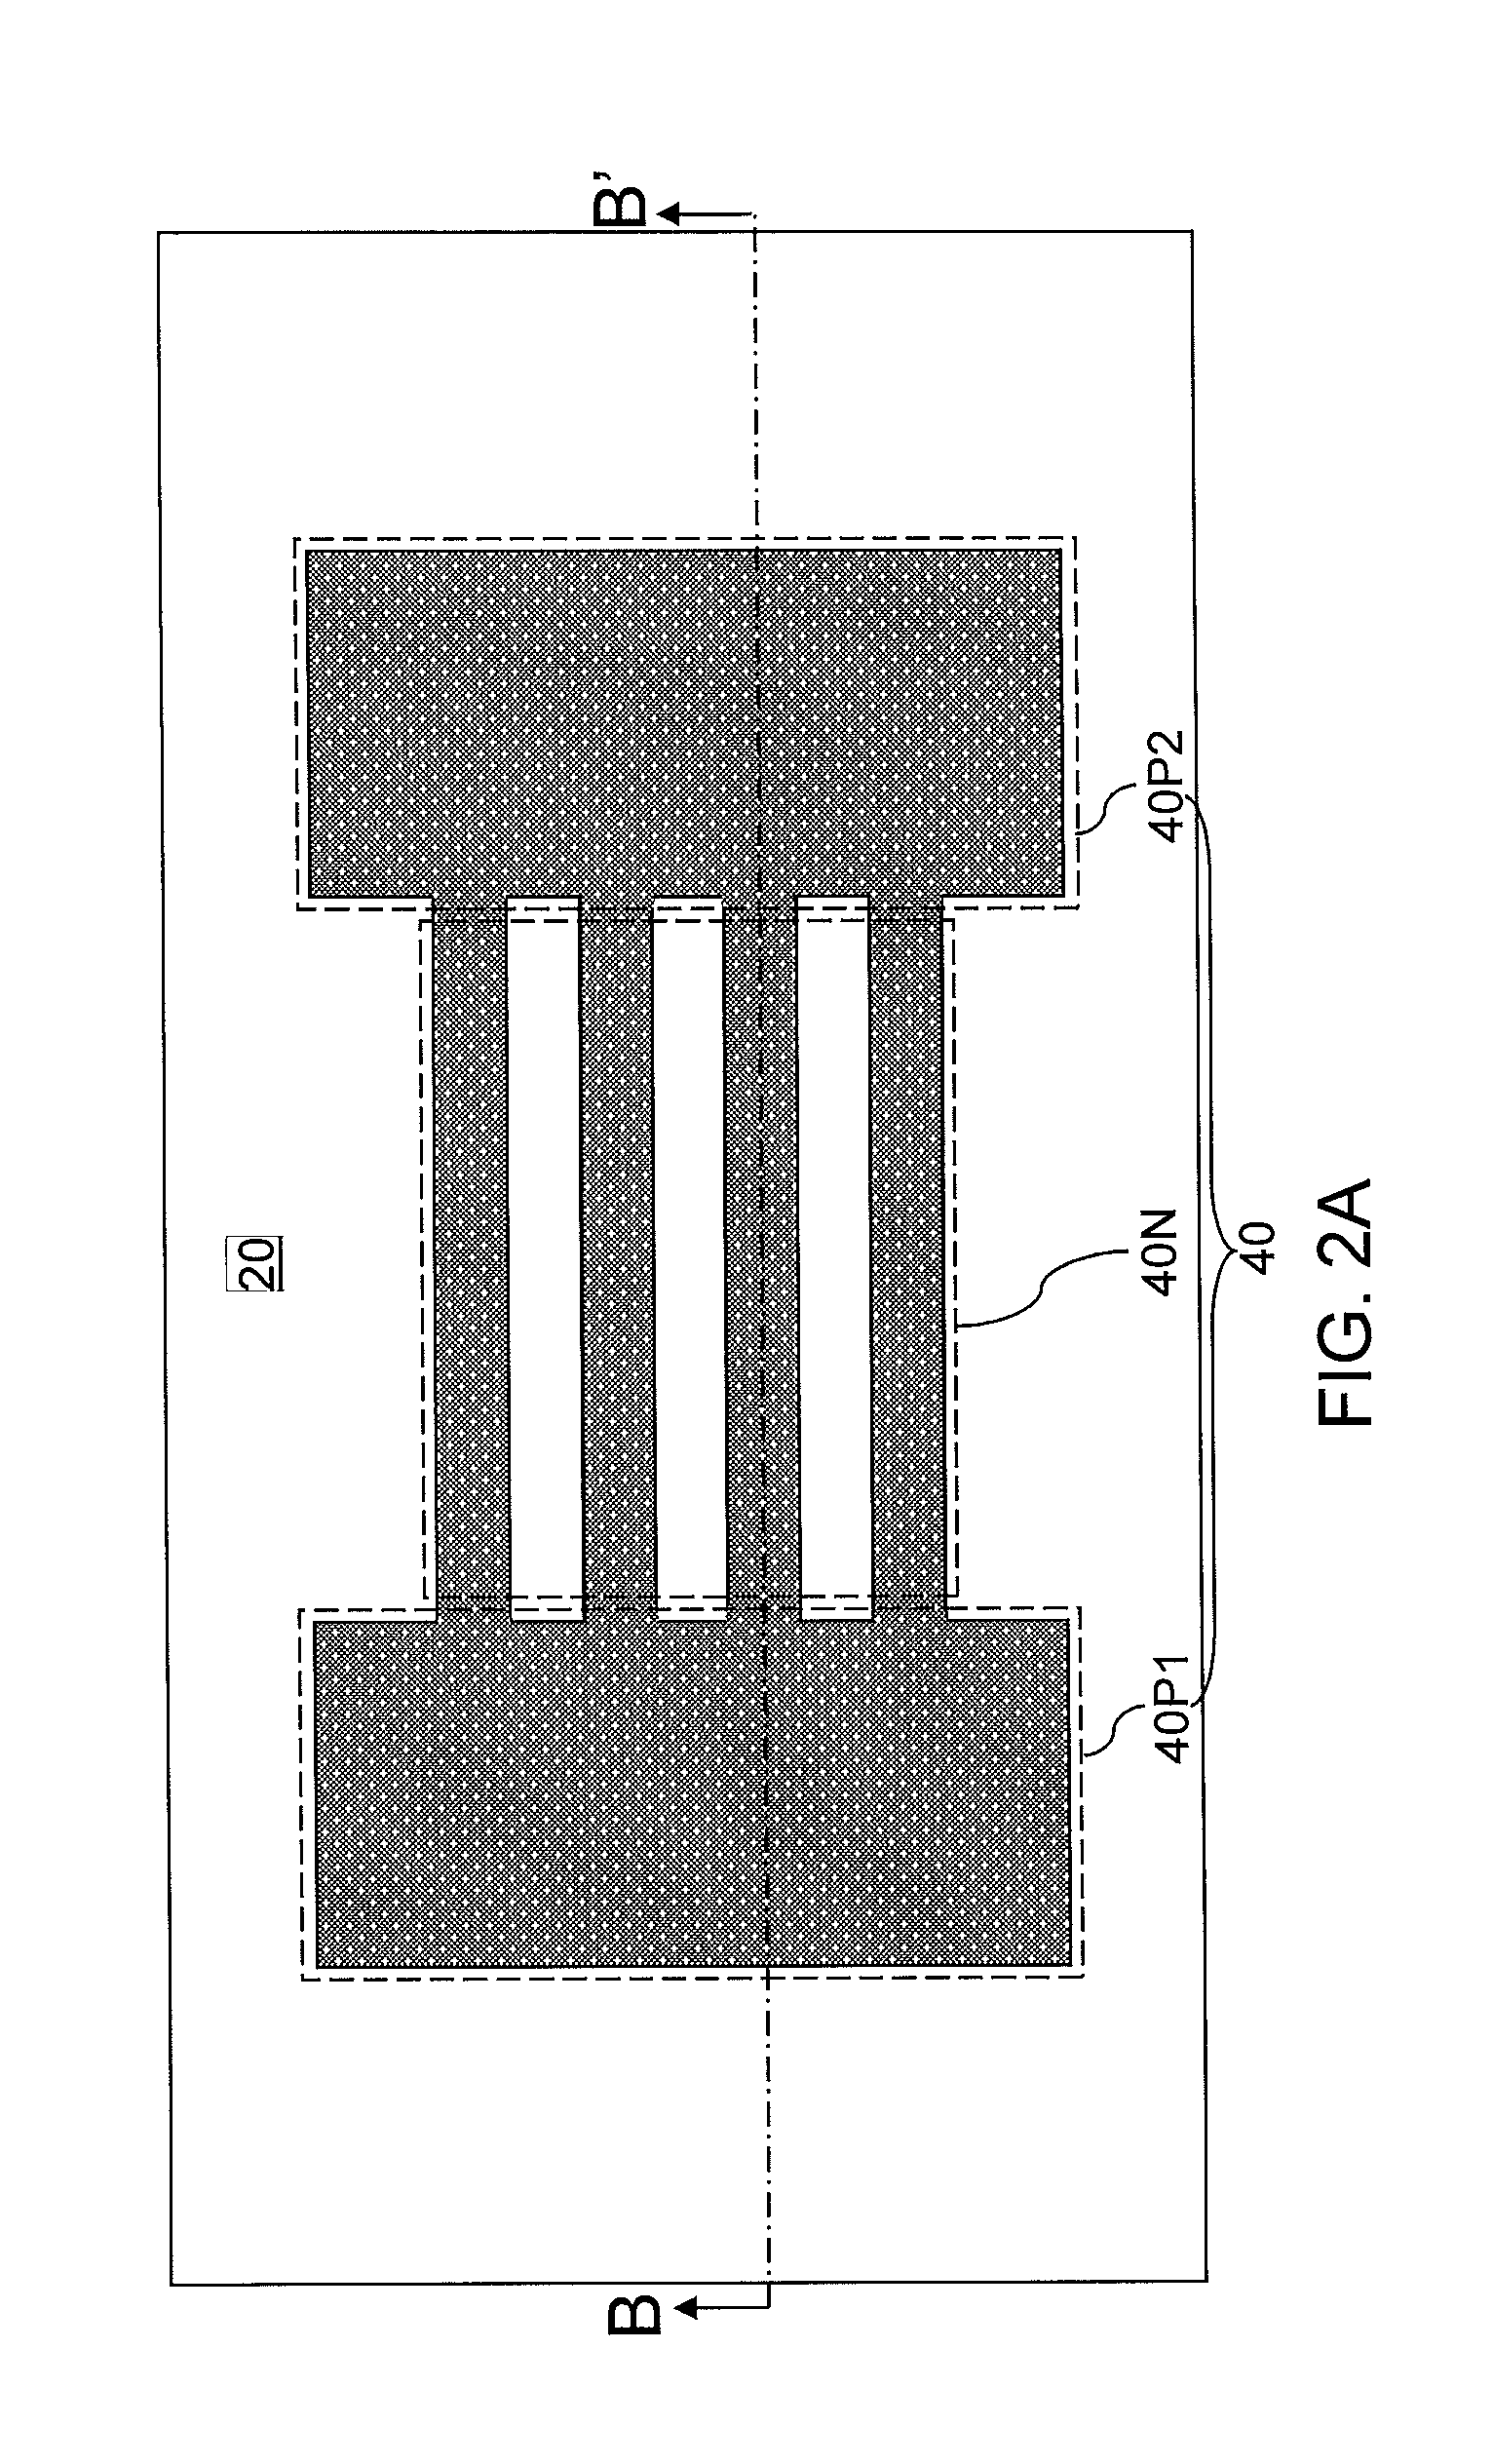 Non-replacement gate nanomesh field effect transistor with epitixially grown source and drain